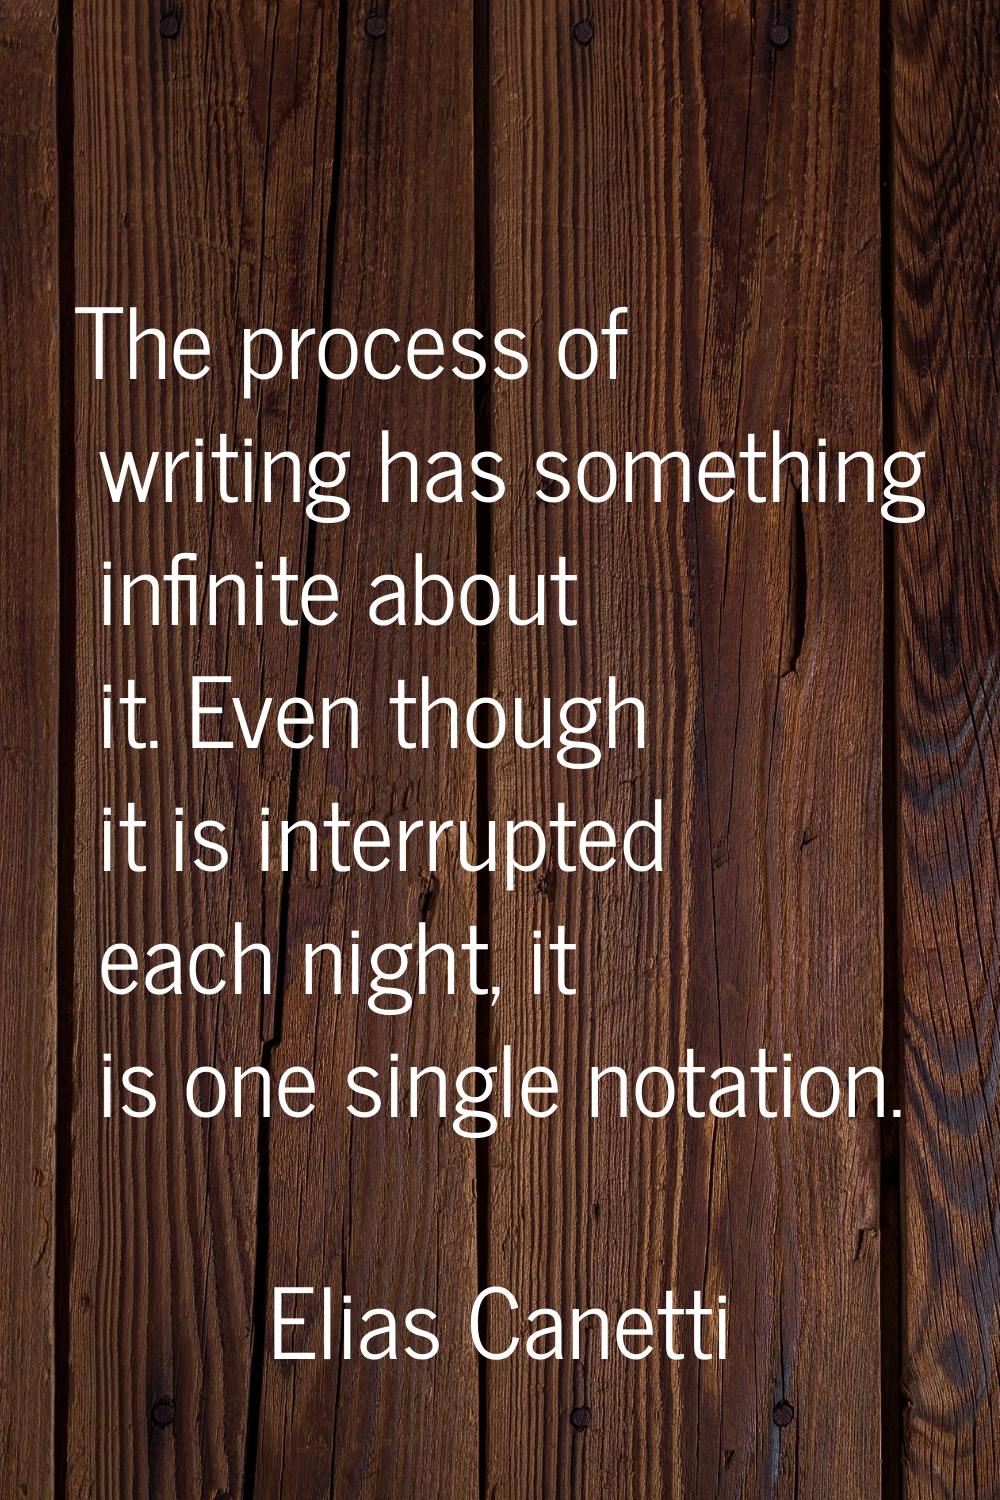 The process of writing has something infinite about it. Even though it is interrupted each night, i